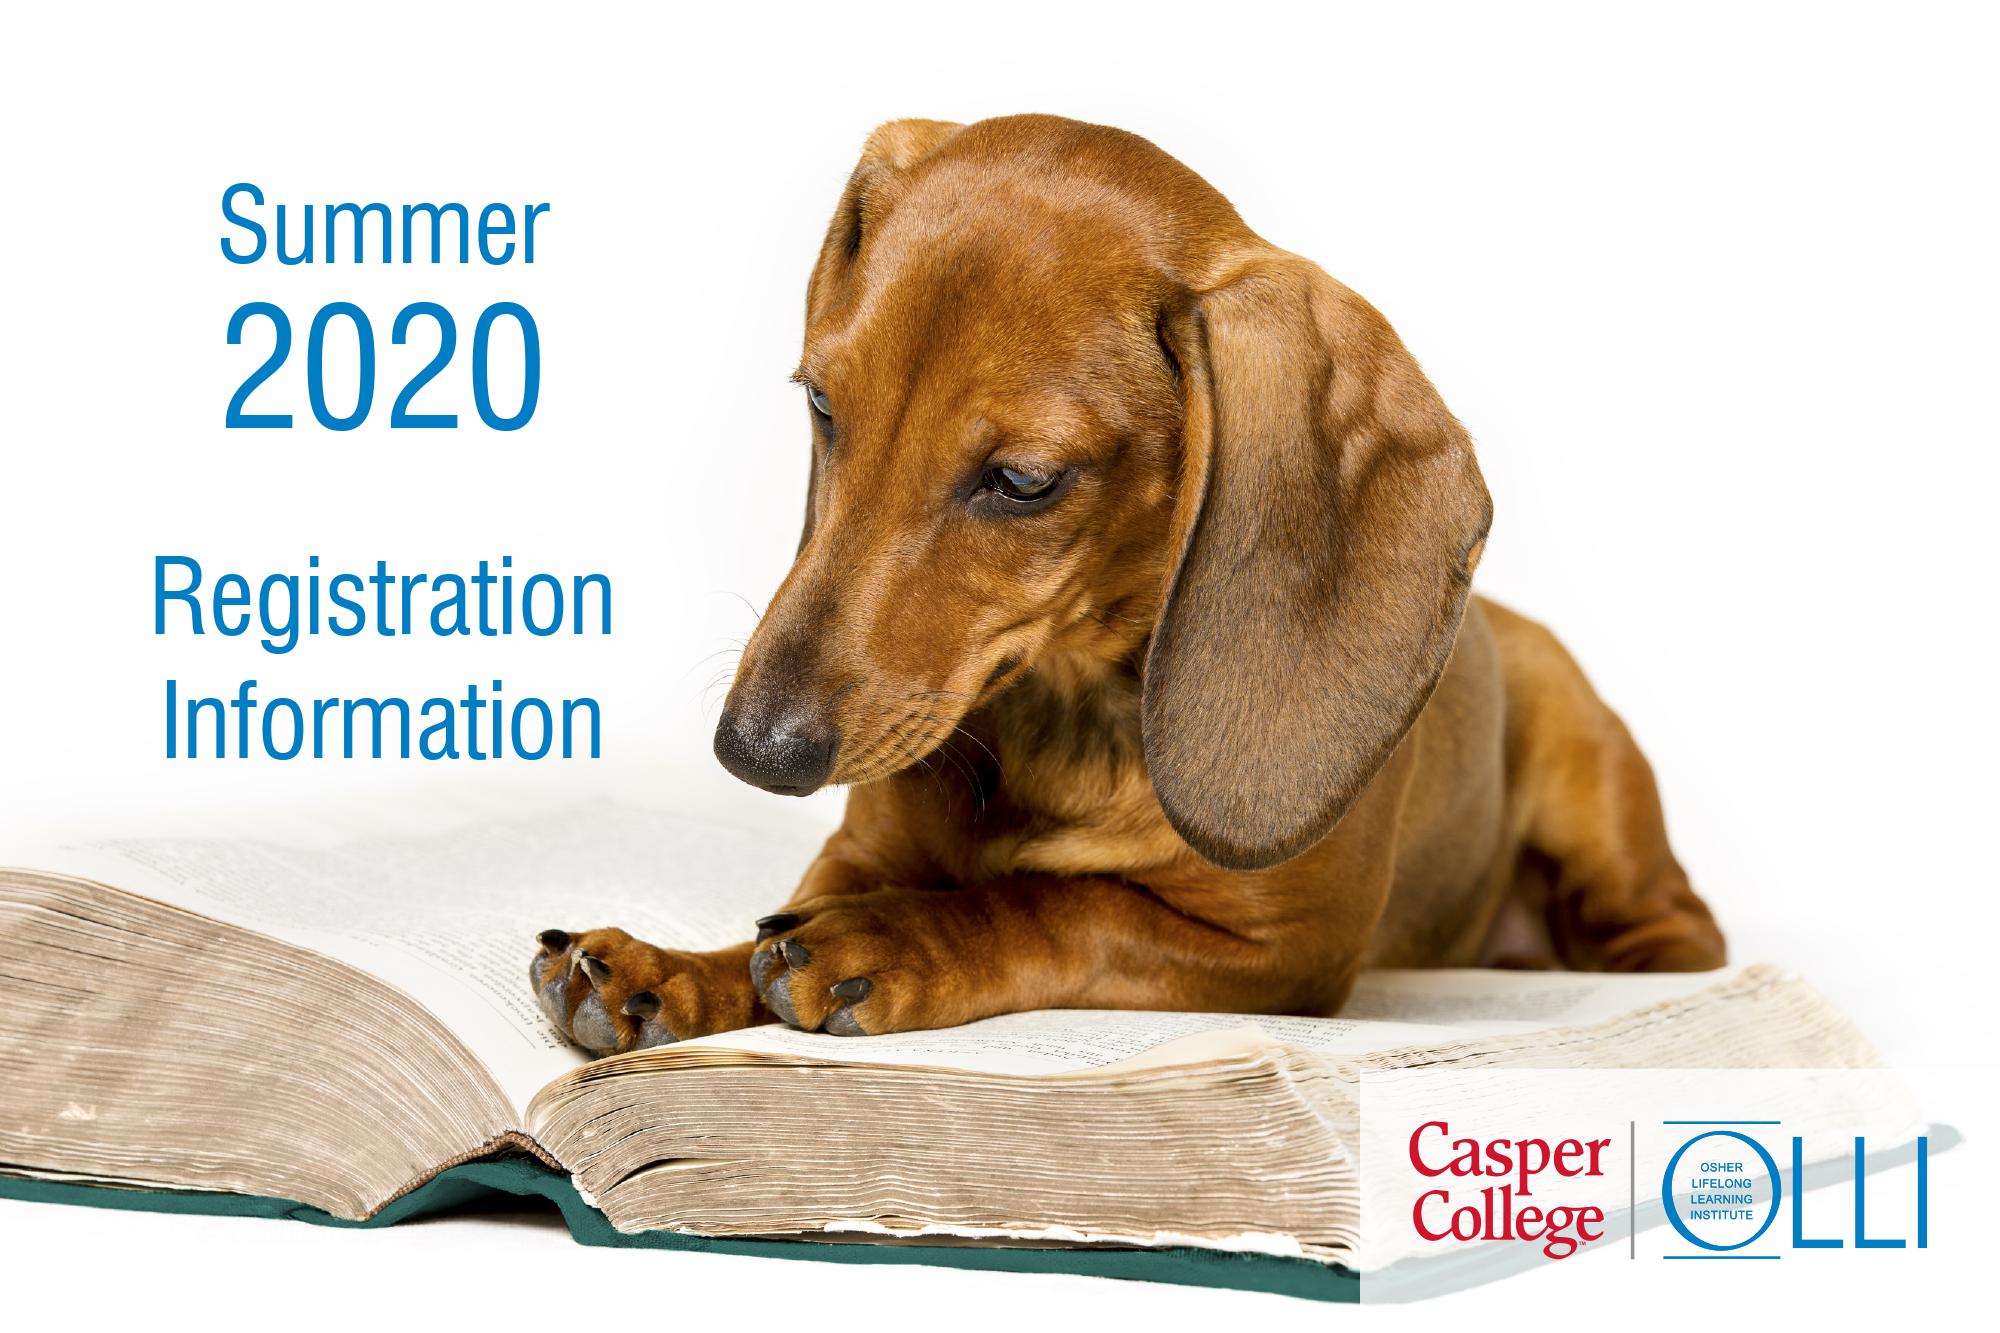 Photograph of a daschund and book with the words "Summer 2020 Registration Information."